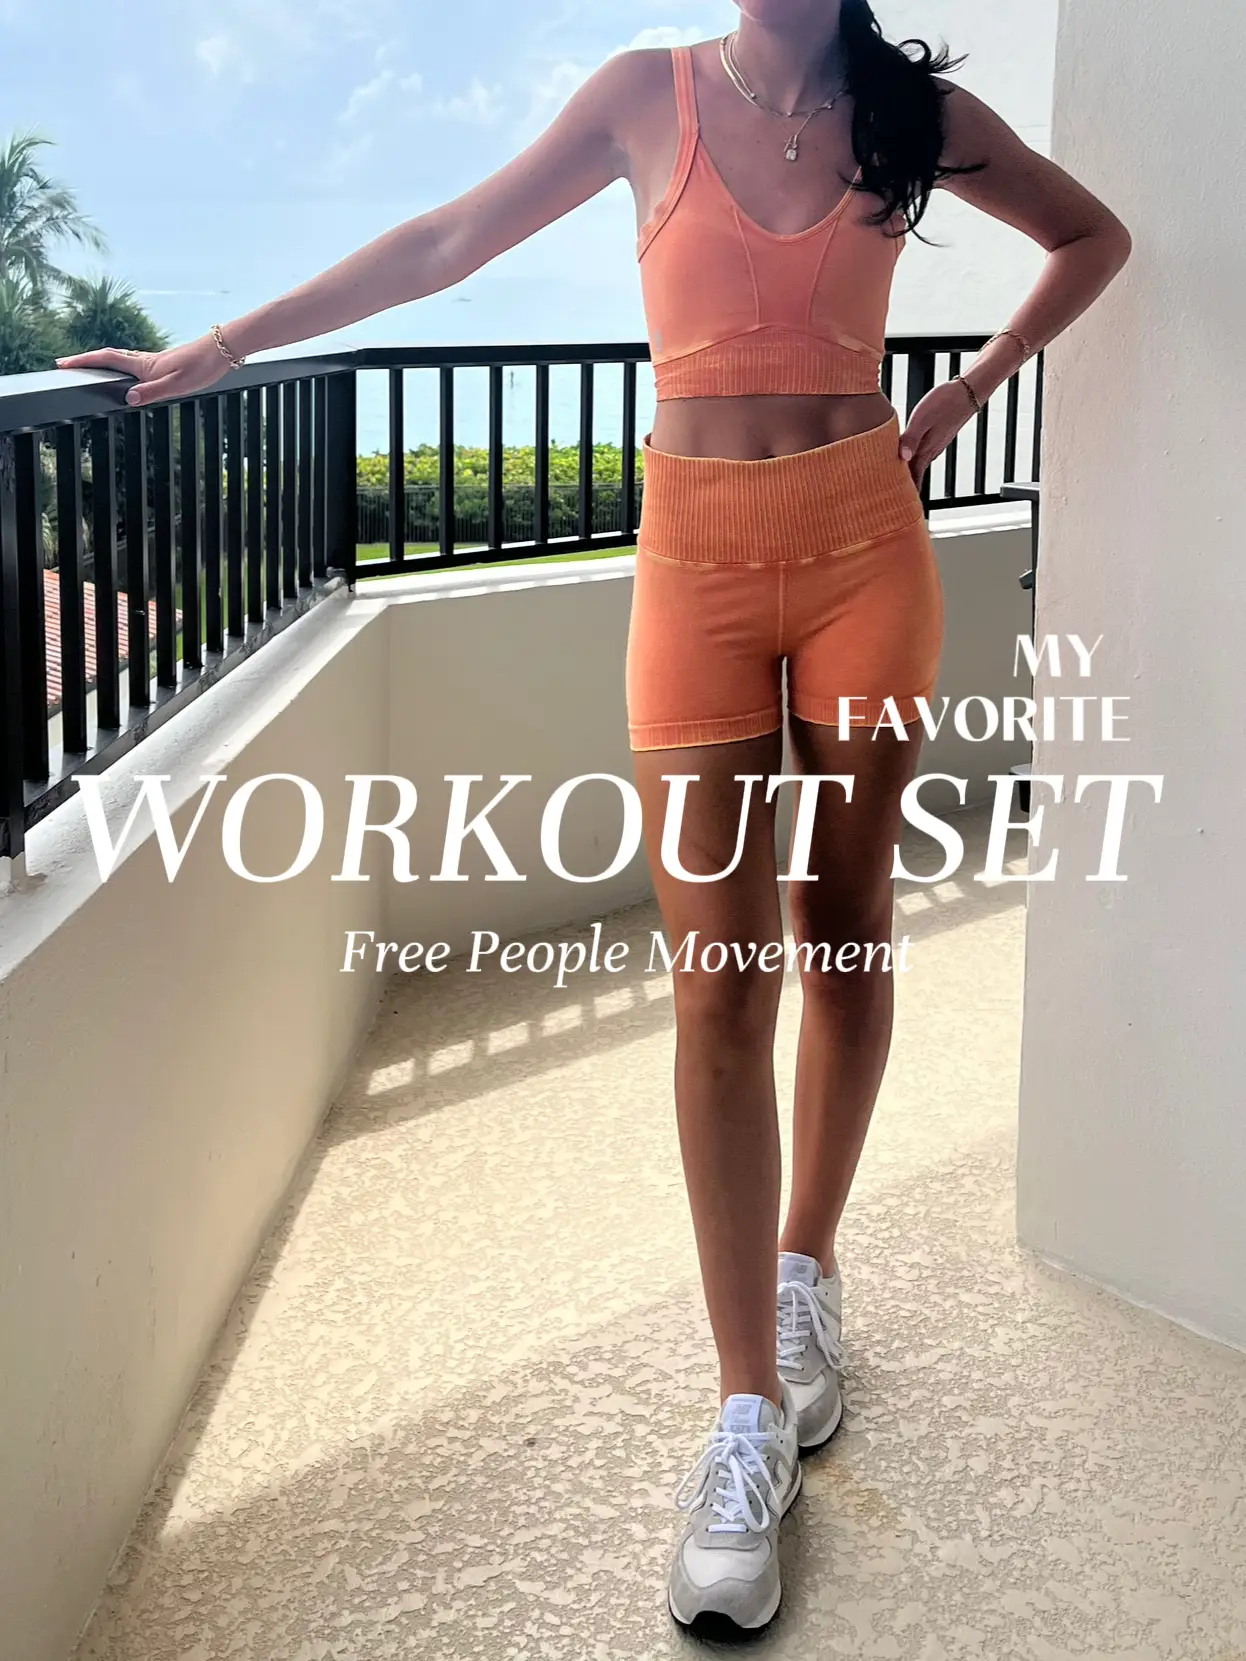 If you love a buttery soft workout set….the @fpmovement Never